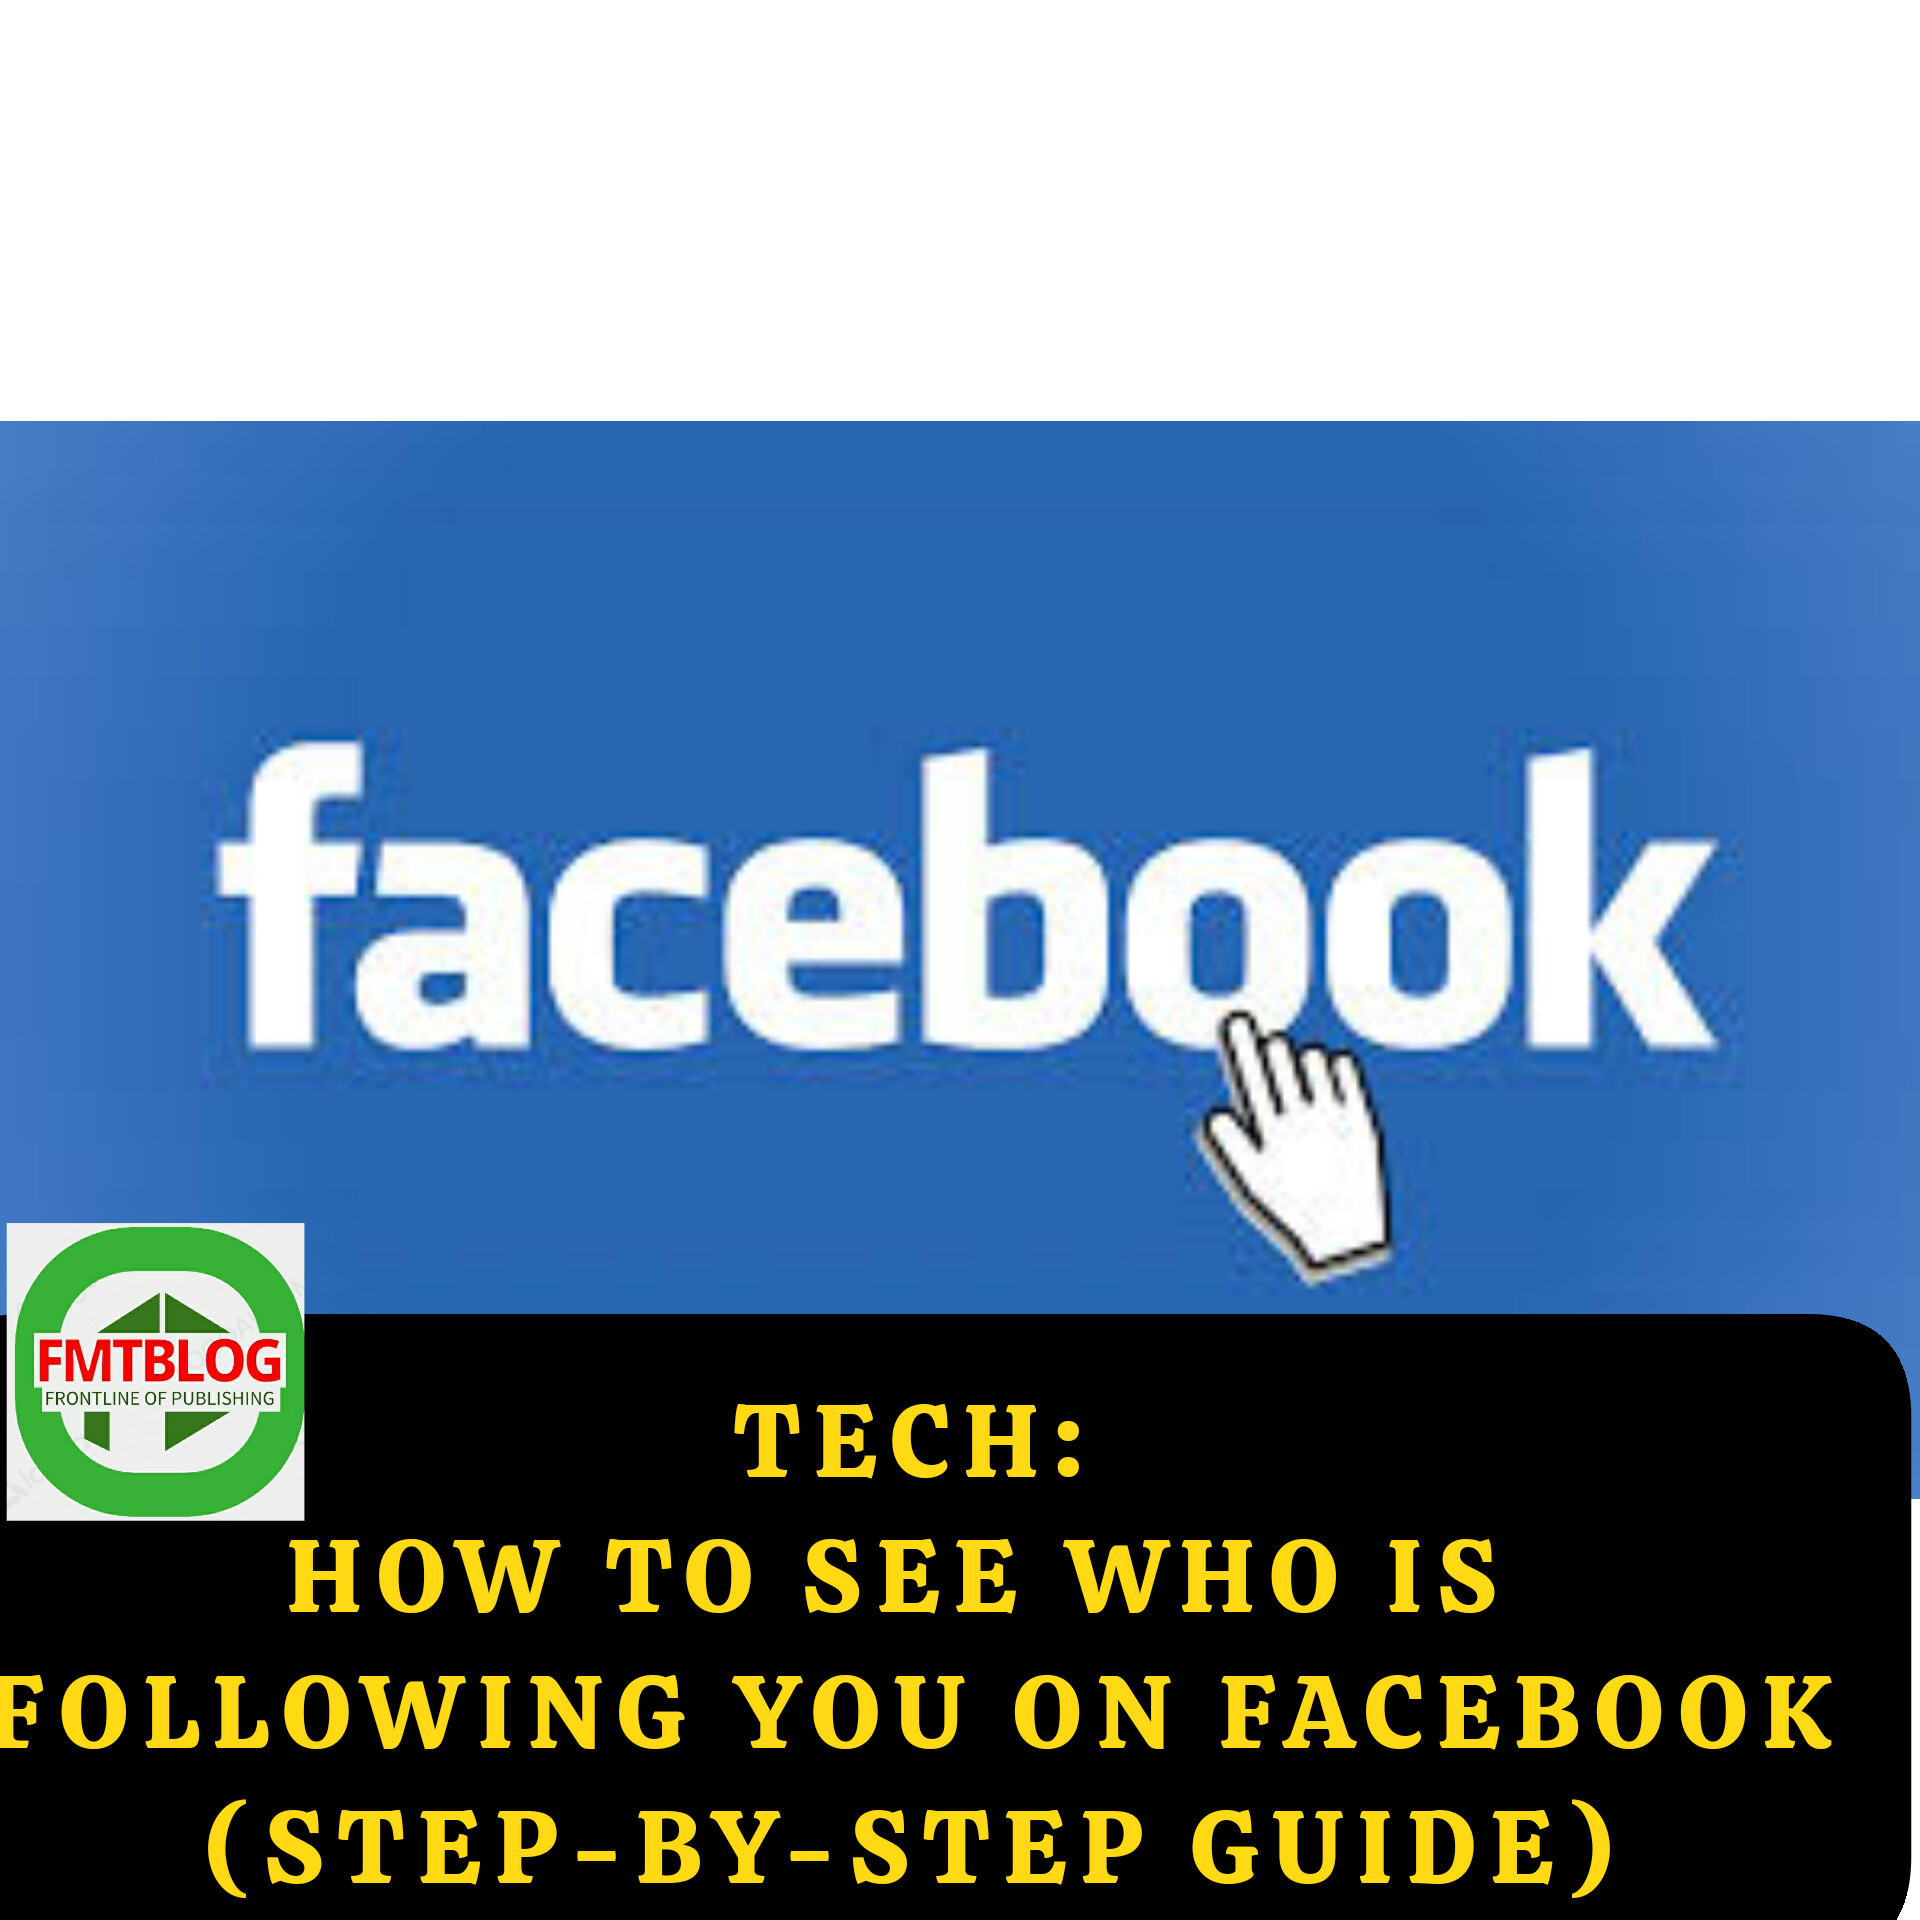 How To See Who Is Following You On Facebook(Step-by-Step Guide)